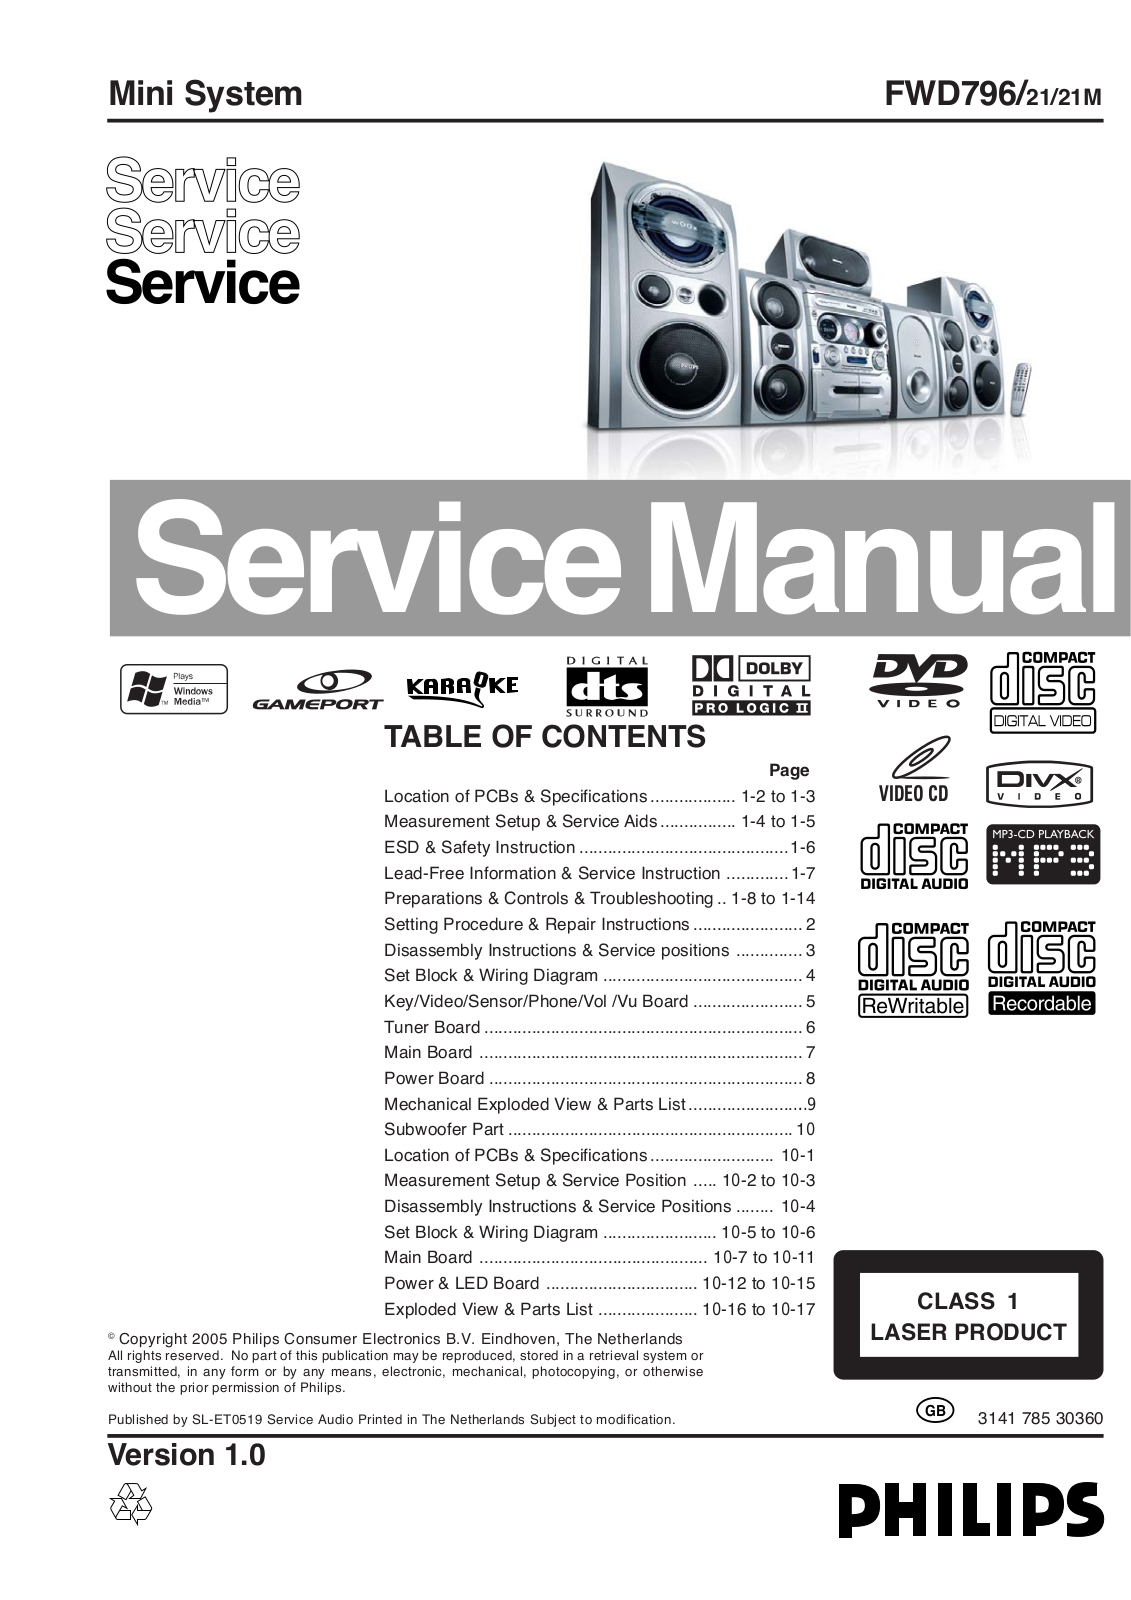 Philips FWD-796 Service manual